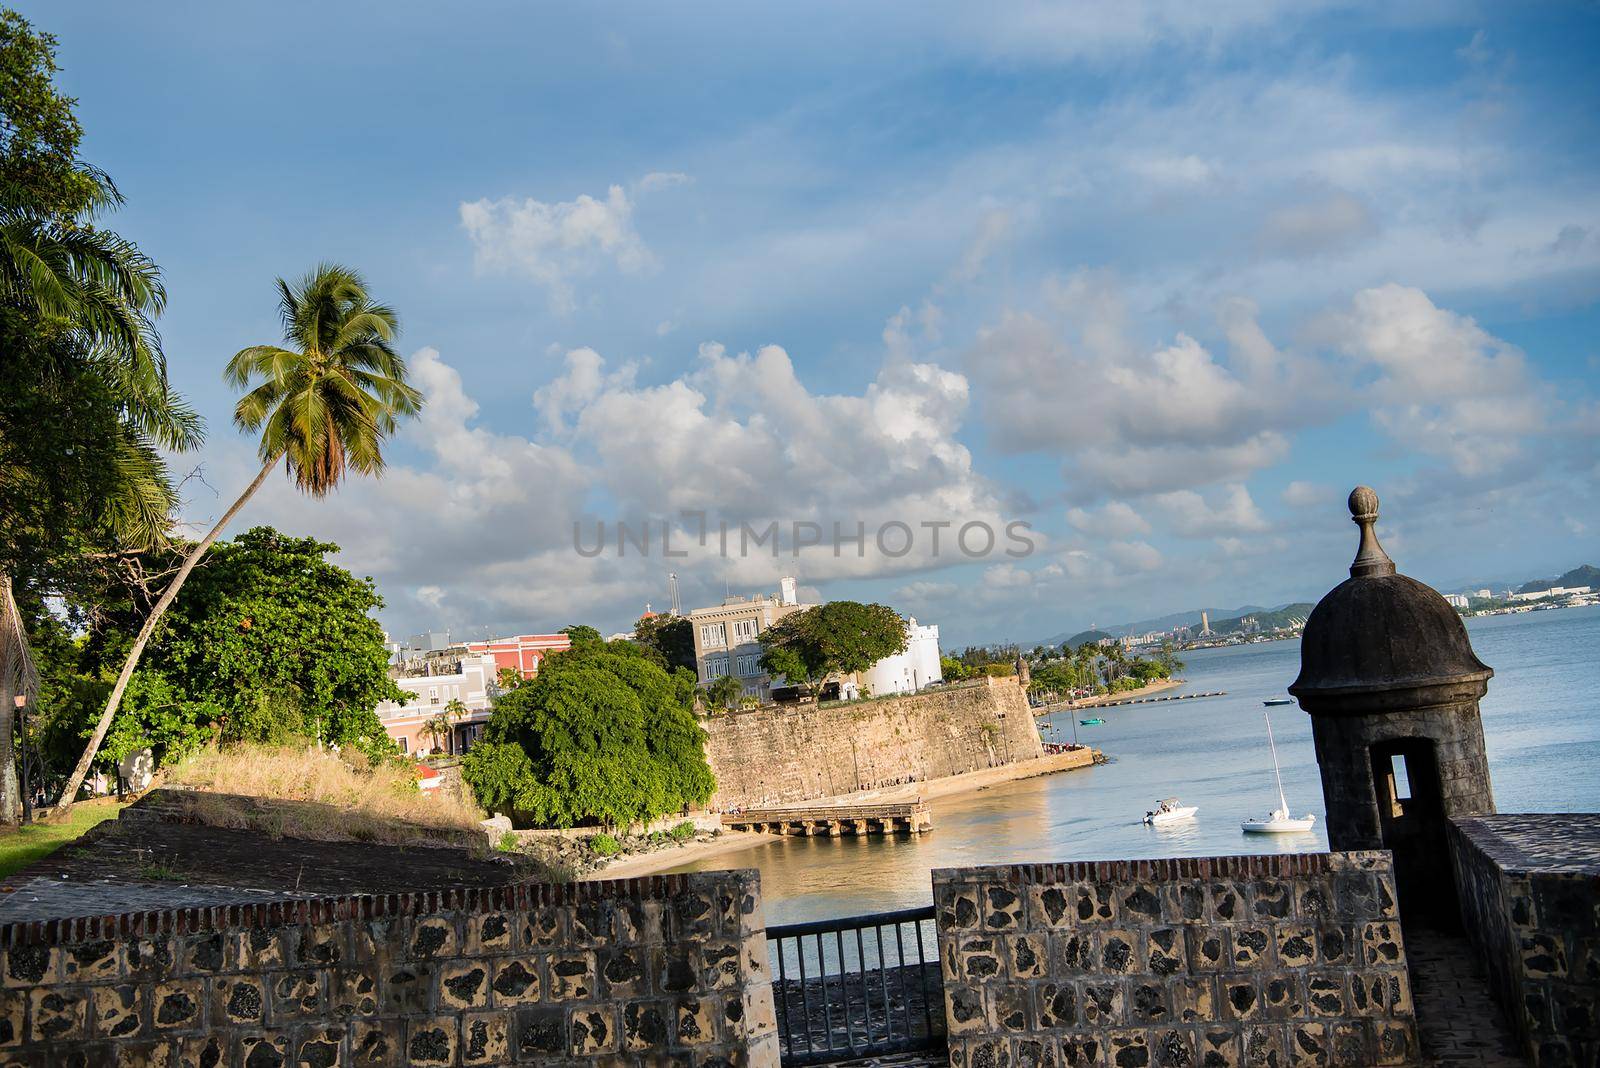 Gorgeous view of San Juan, Puerto Rico city scape with historic brick, palm trees, water, and blue skies.